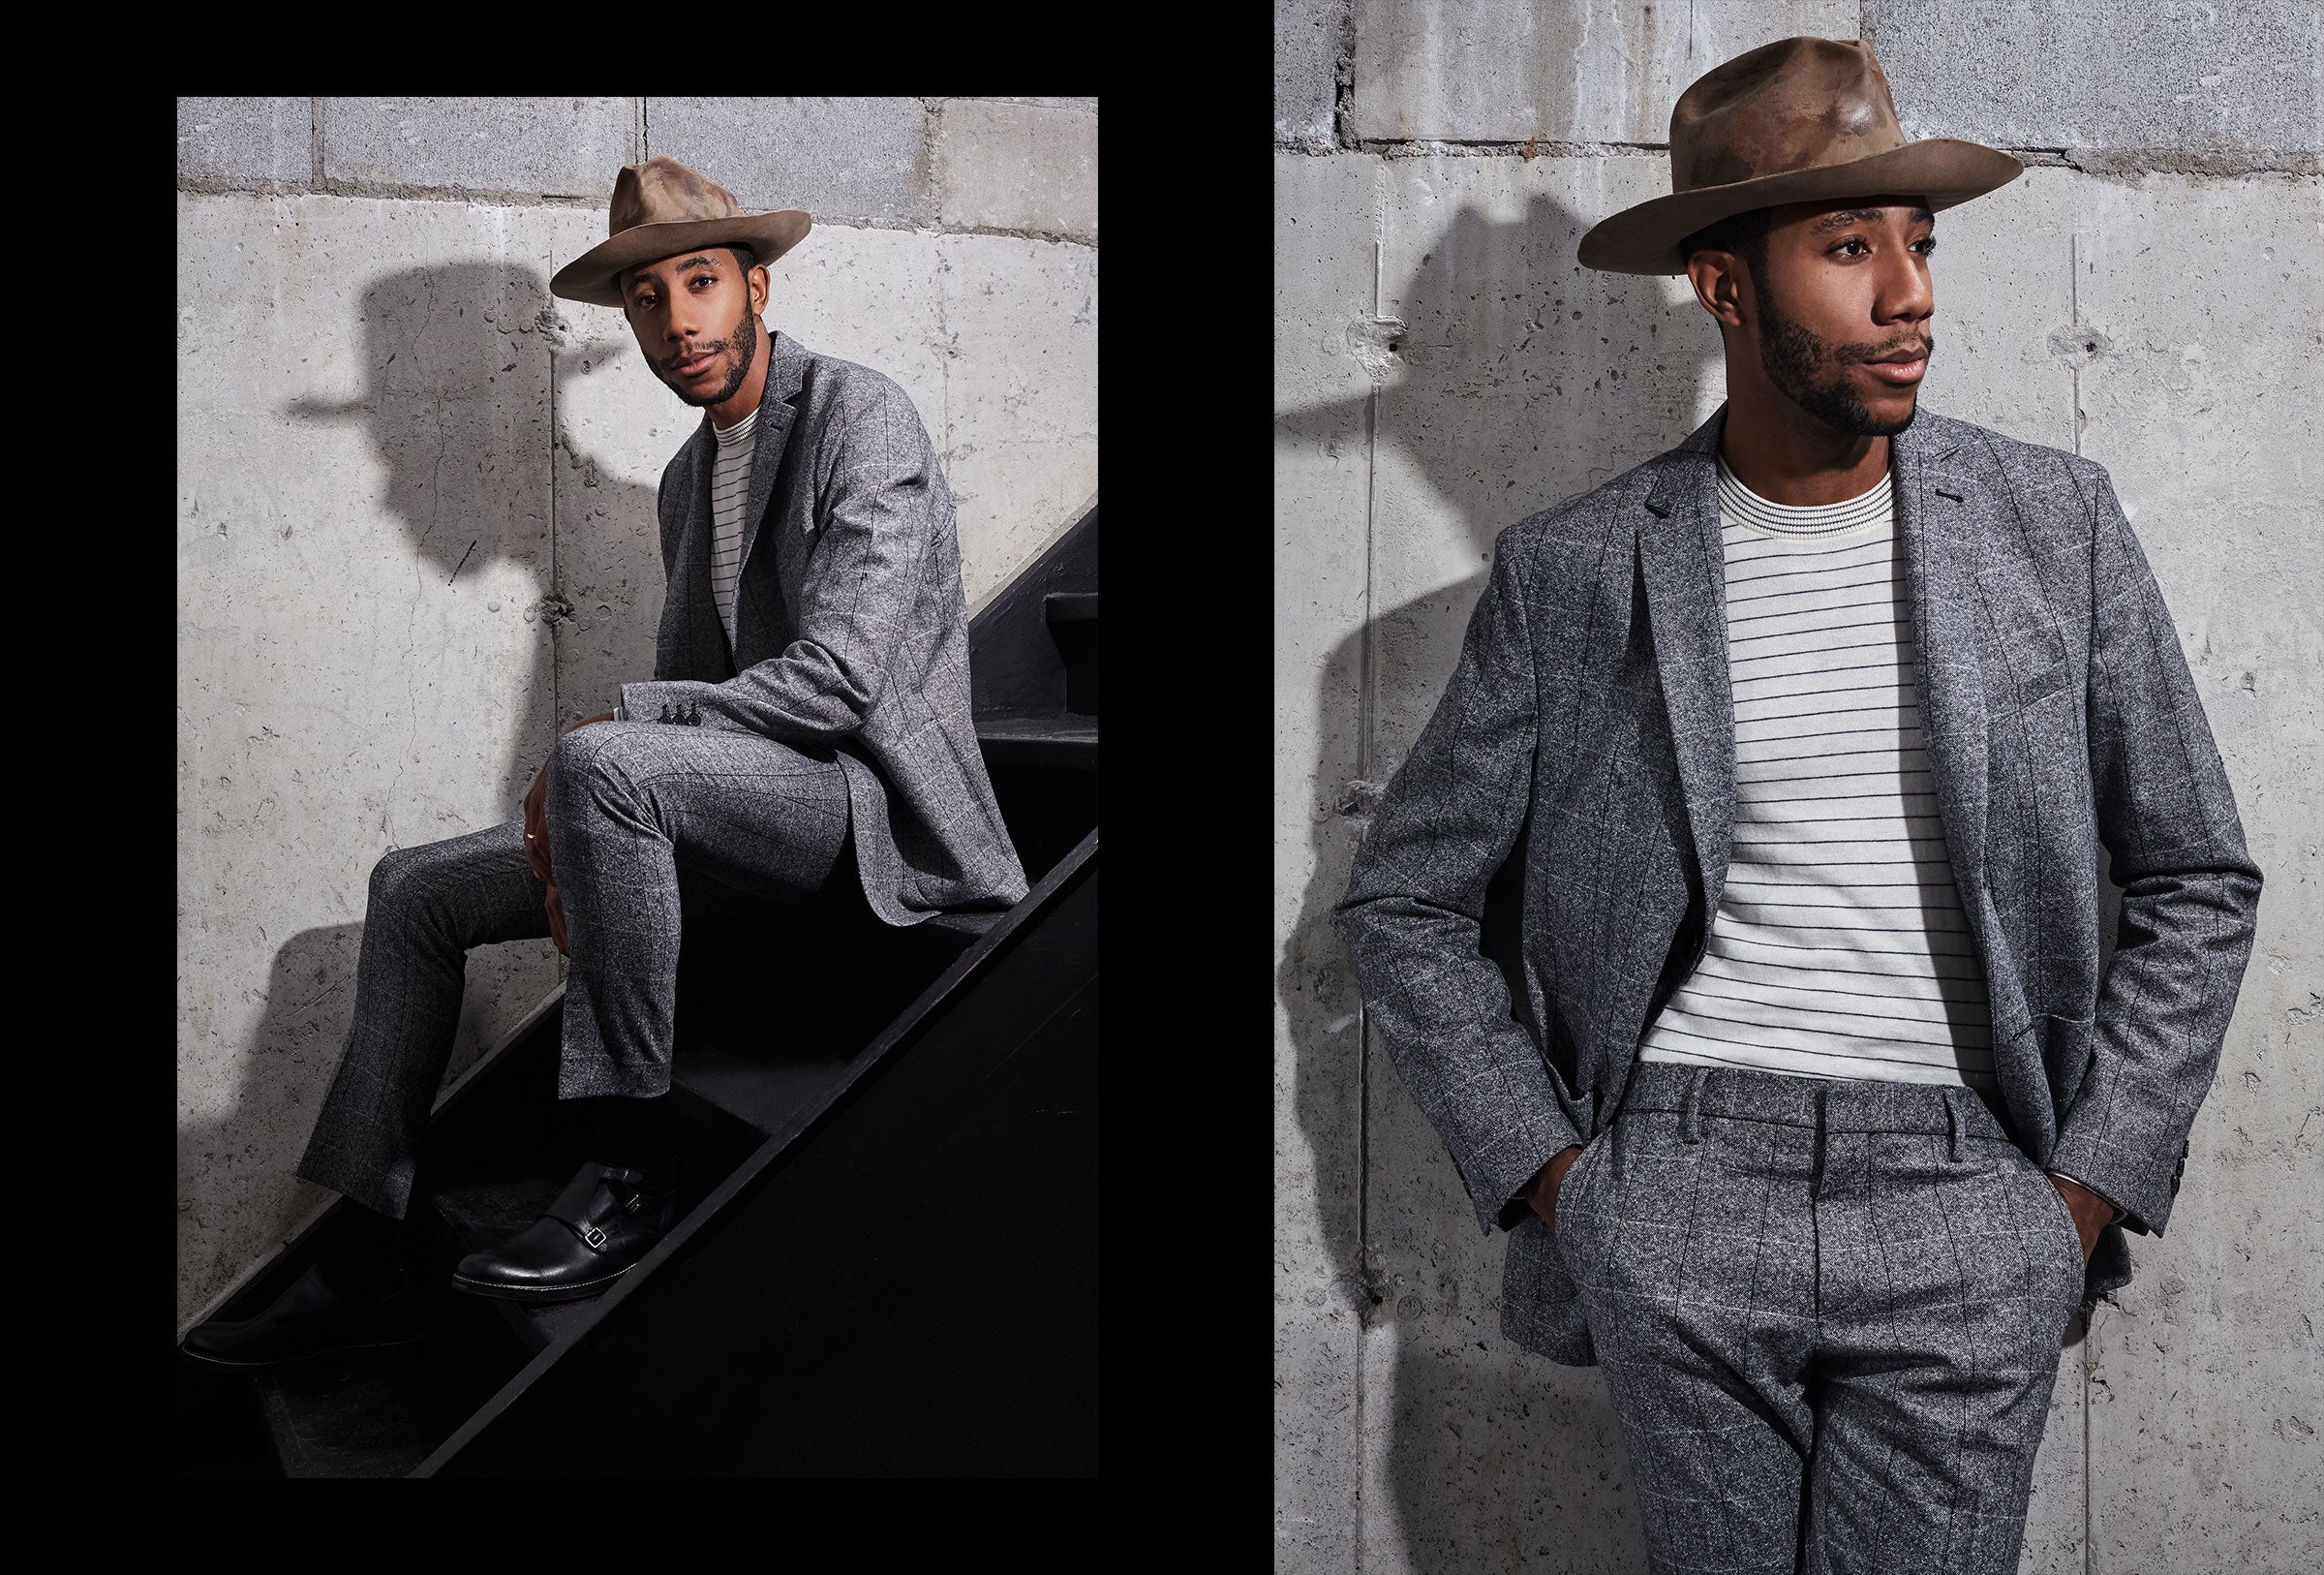 La Touche wears the Salt and Pepper Blazer and Trouser in Grey.